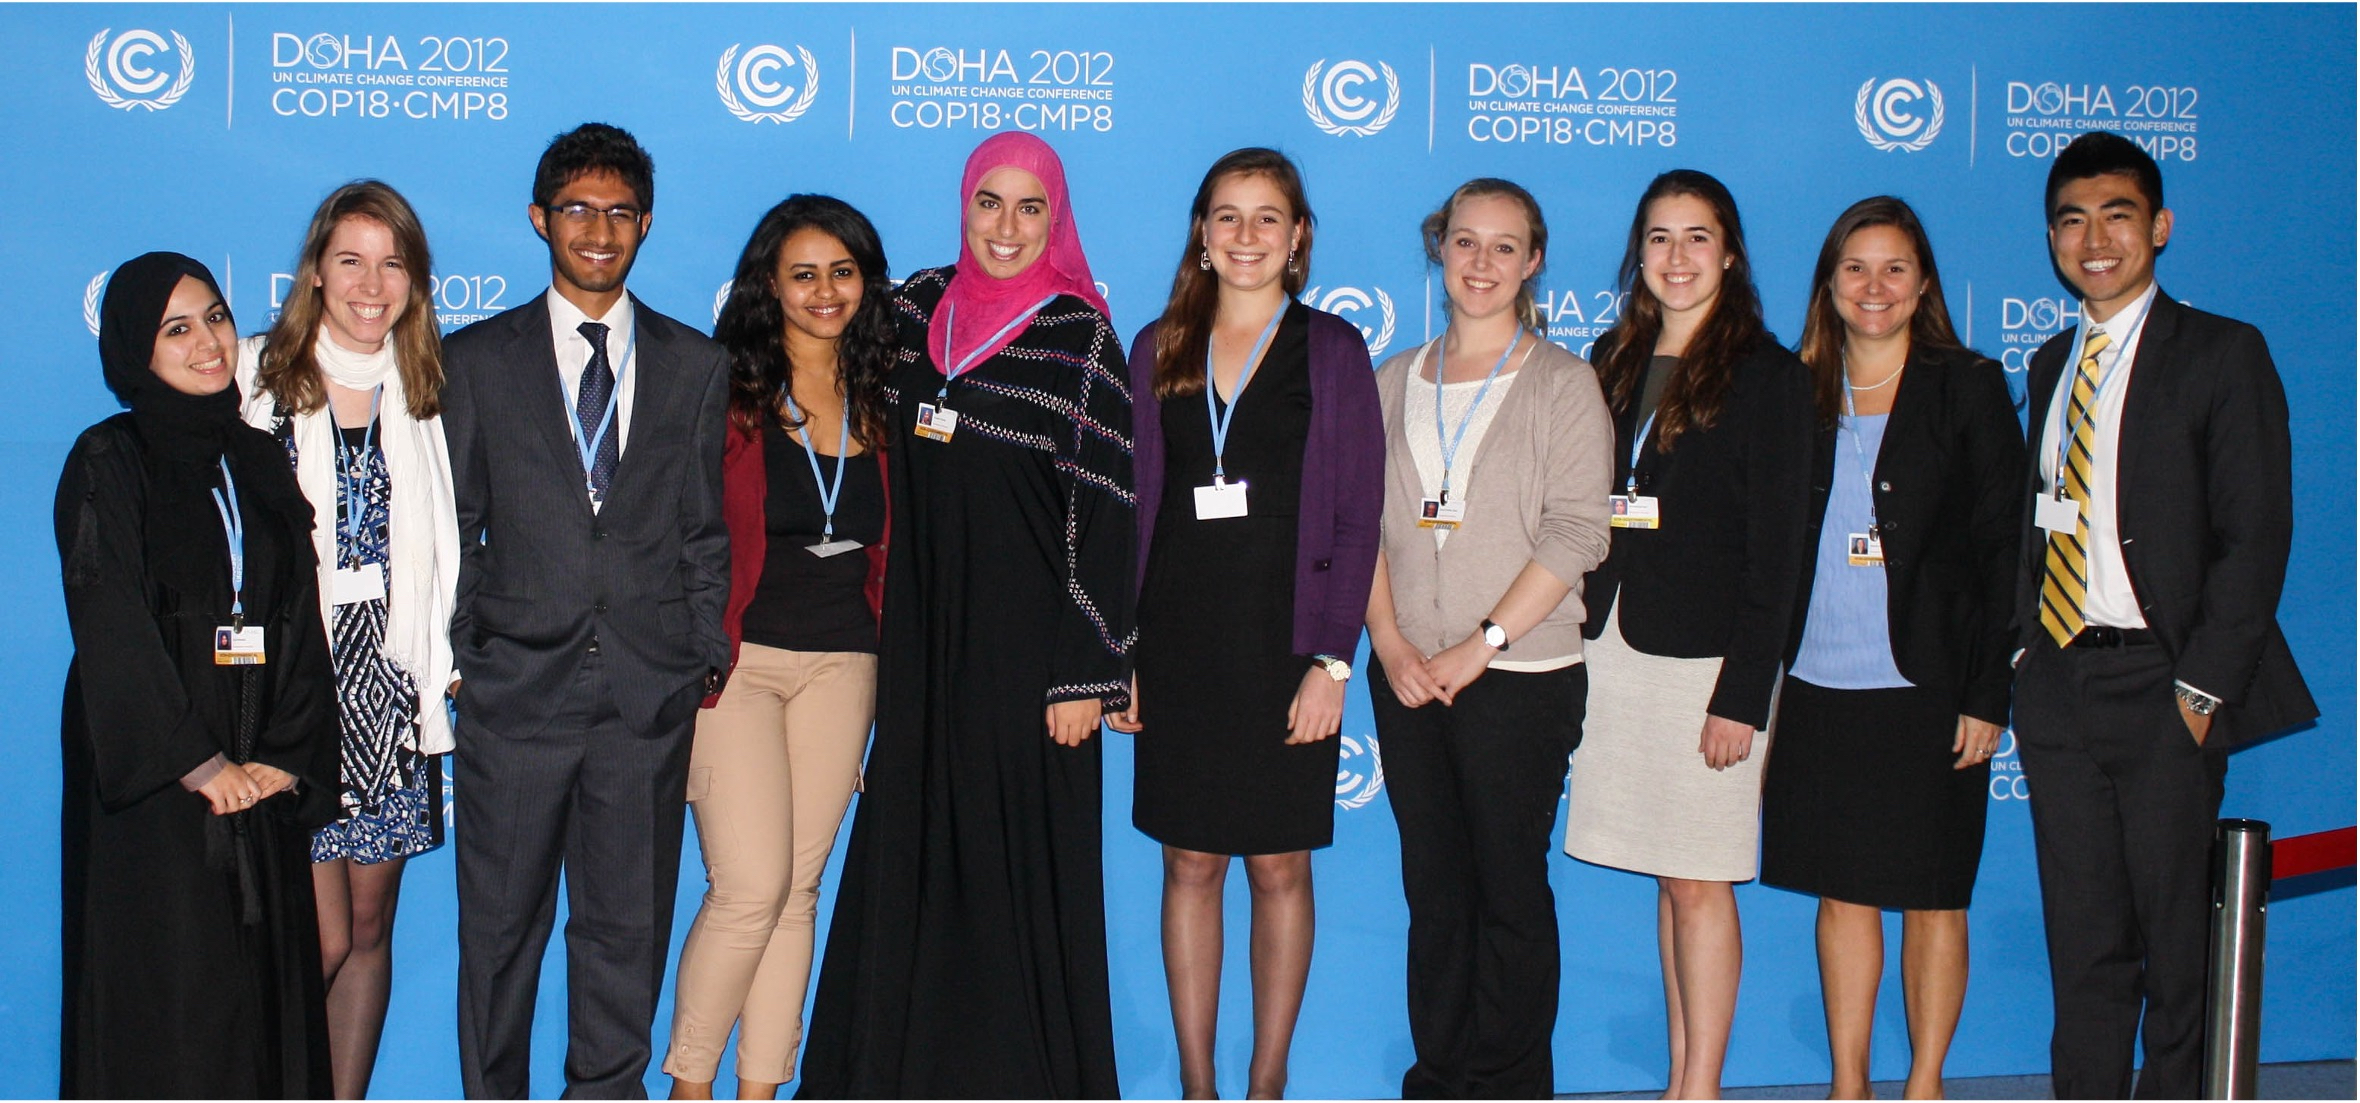 10 students stand next to each other in front of a blue background at a COP18 conference in Doha